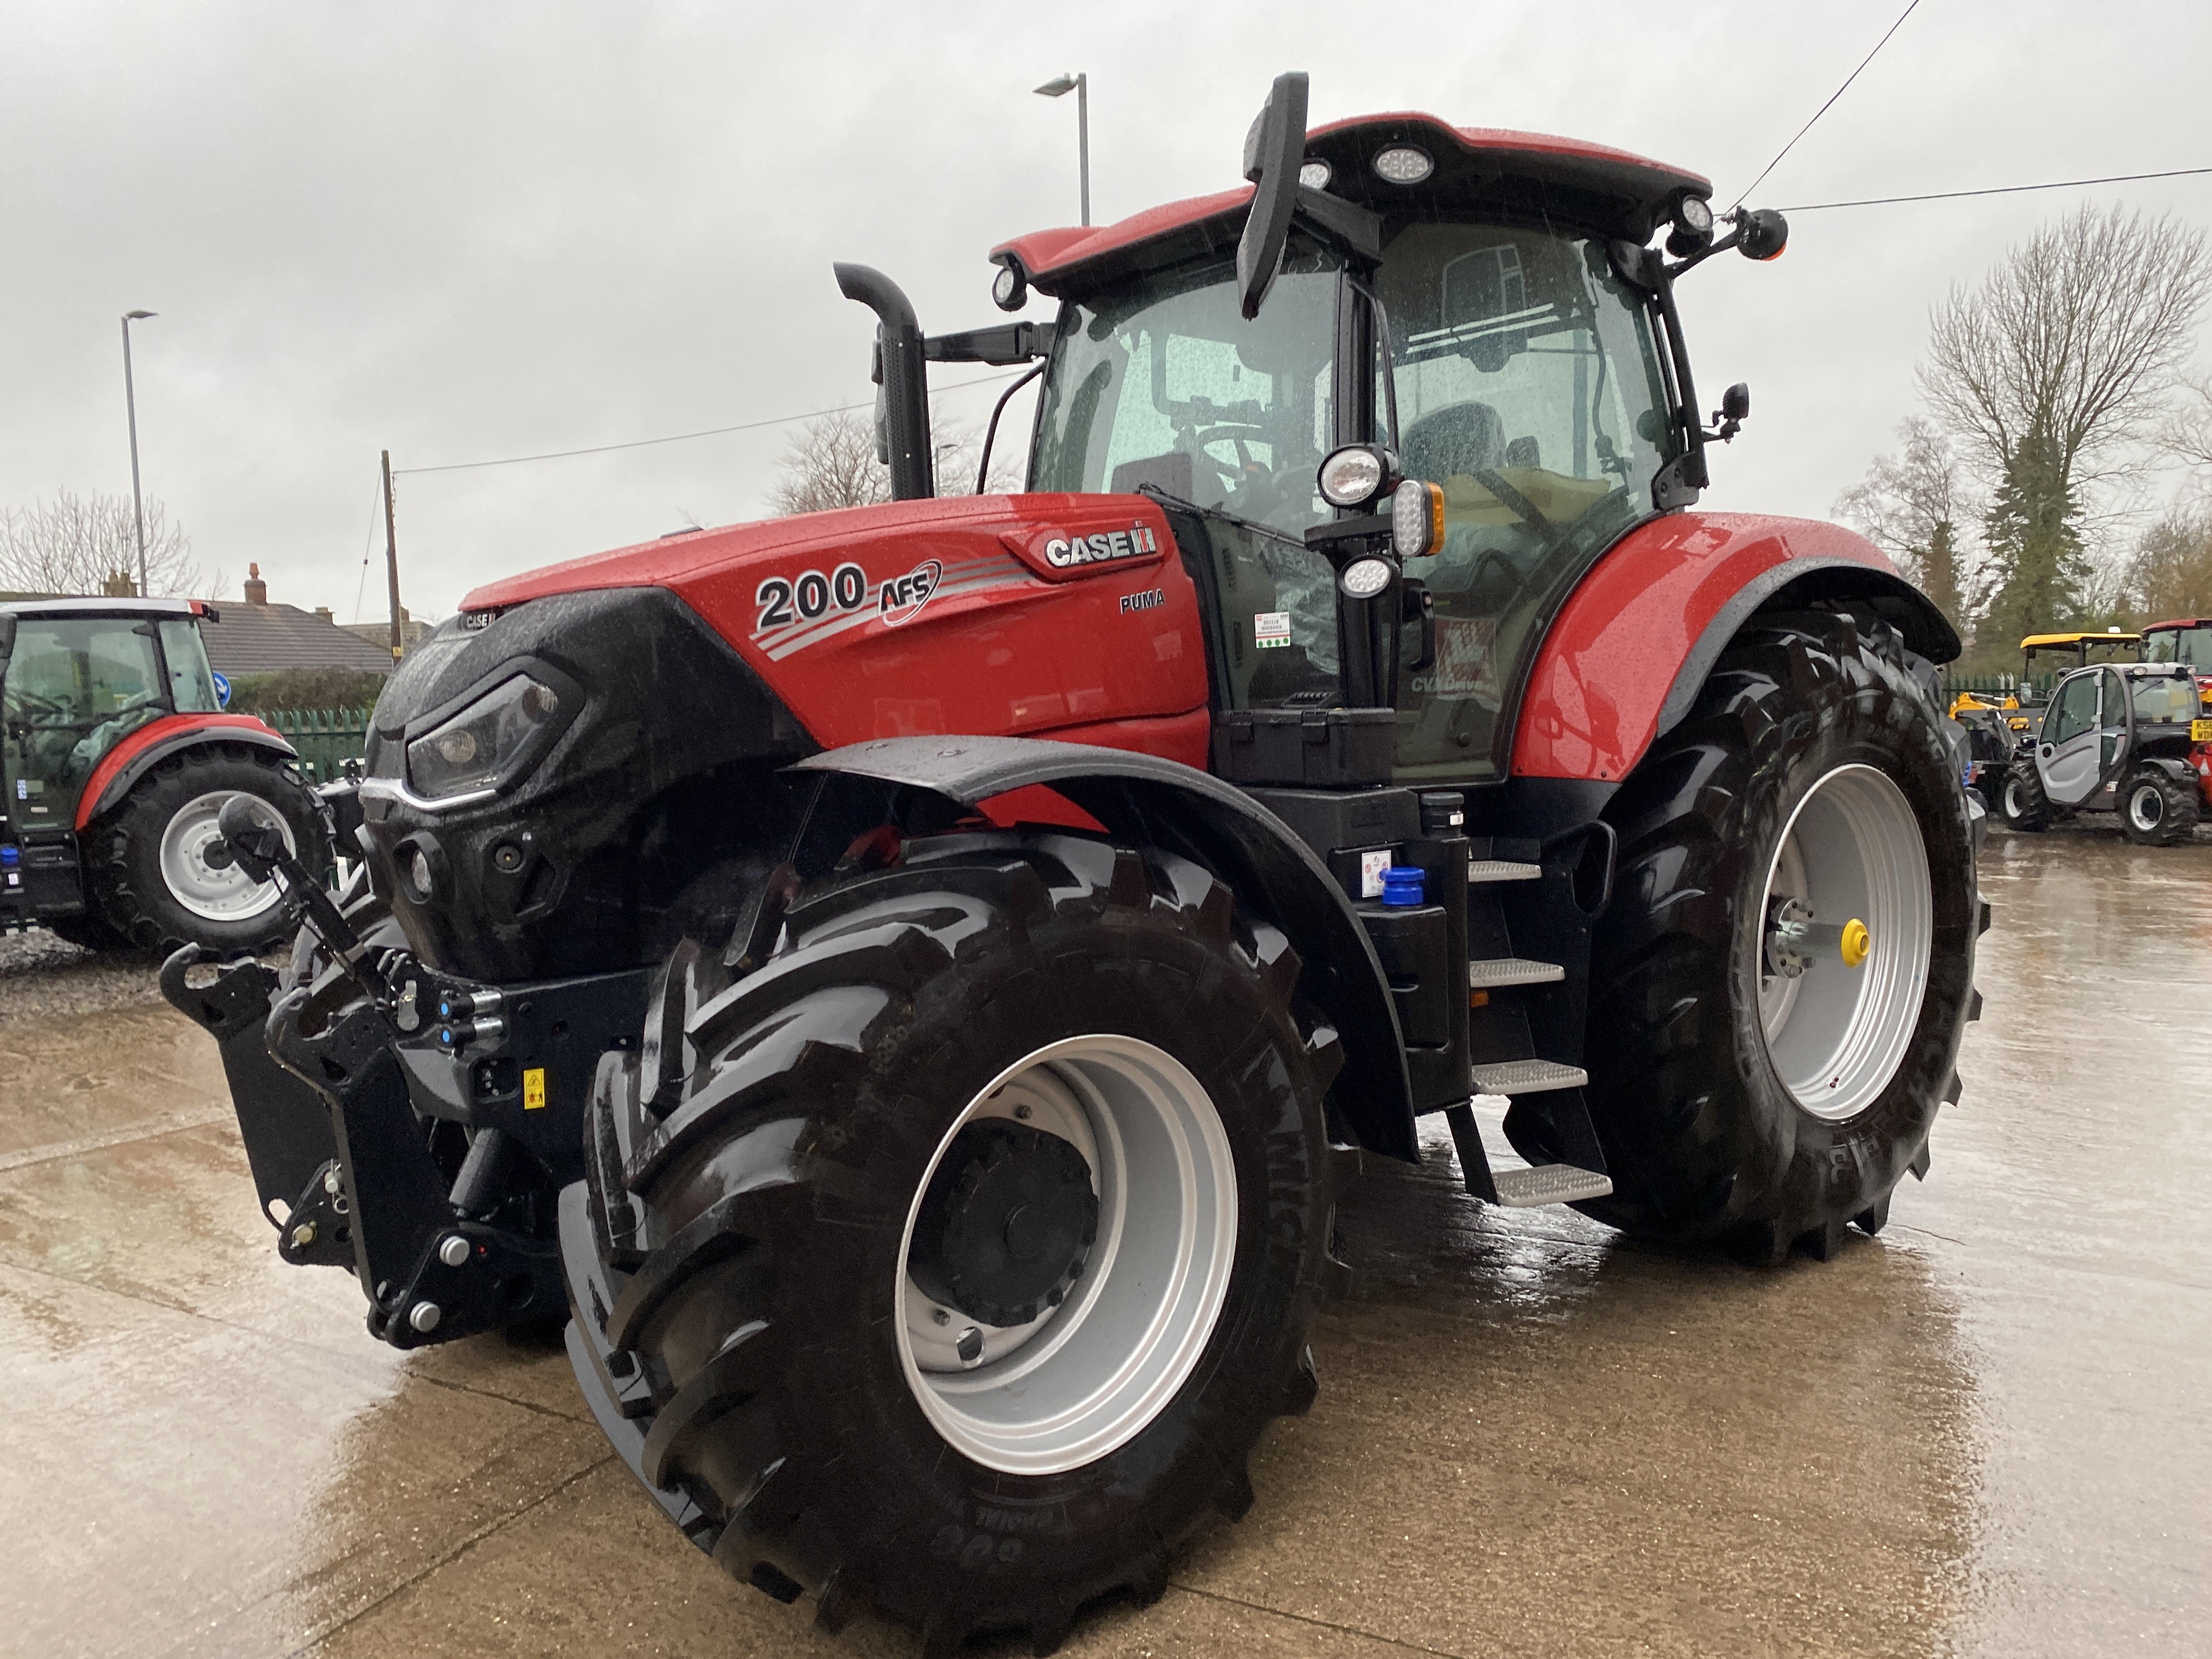 Matón Obstinado Escándalo Startin Tractors on Twitter: "Just Arrived! Case IH Puma 200 CVX Front  Linkage Accuguide Ready. https://t.co/yeeHWoToEr #tractor  https://t.co/jUJFDT00lY" / Twitter